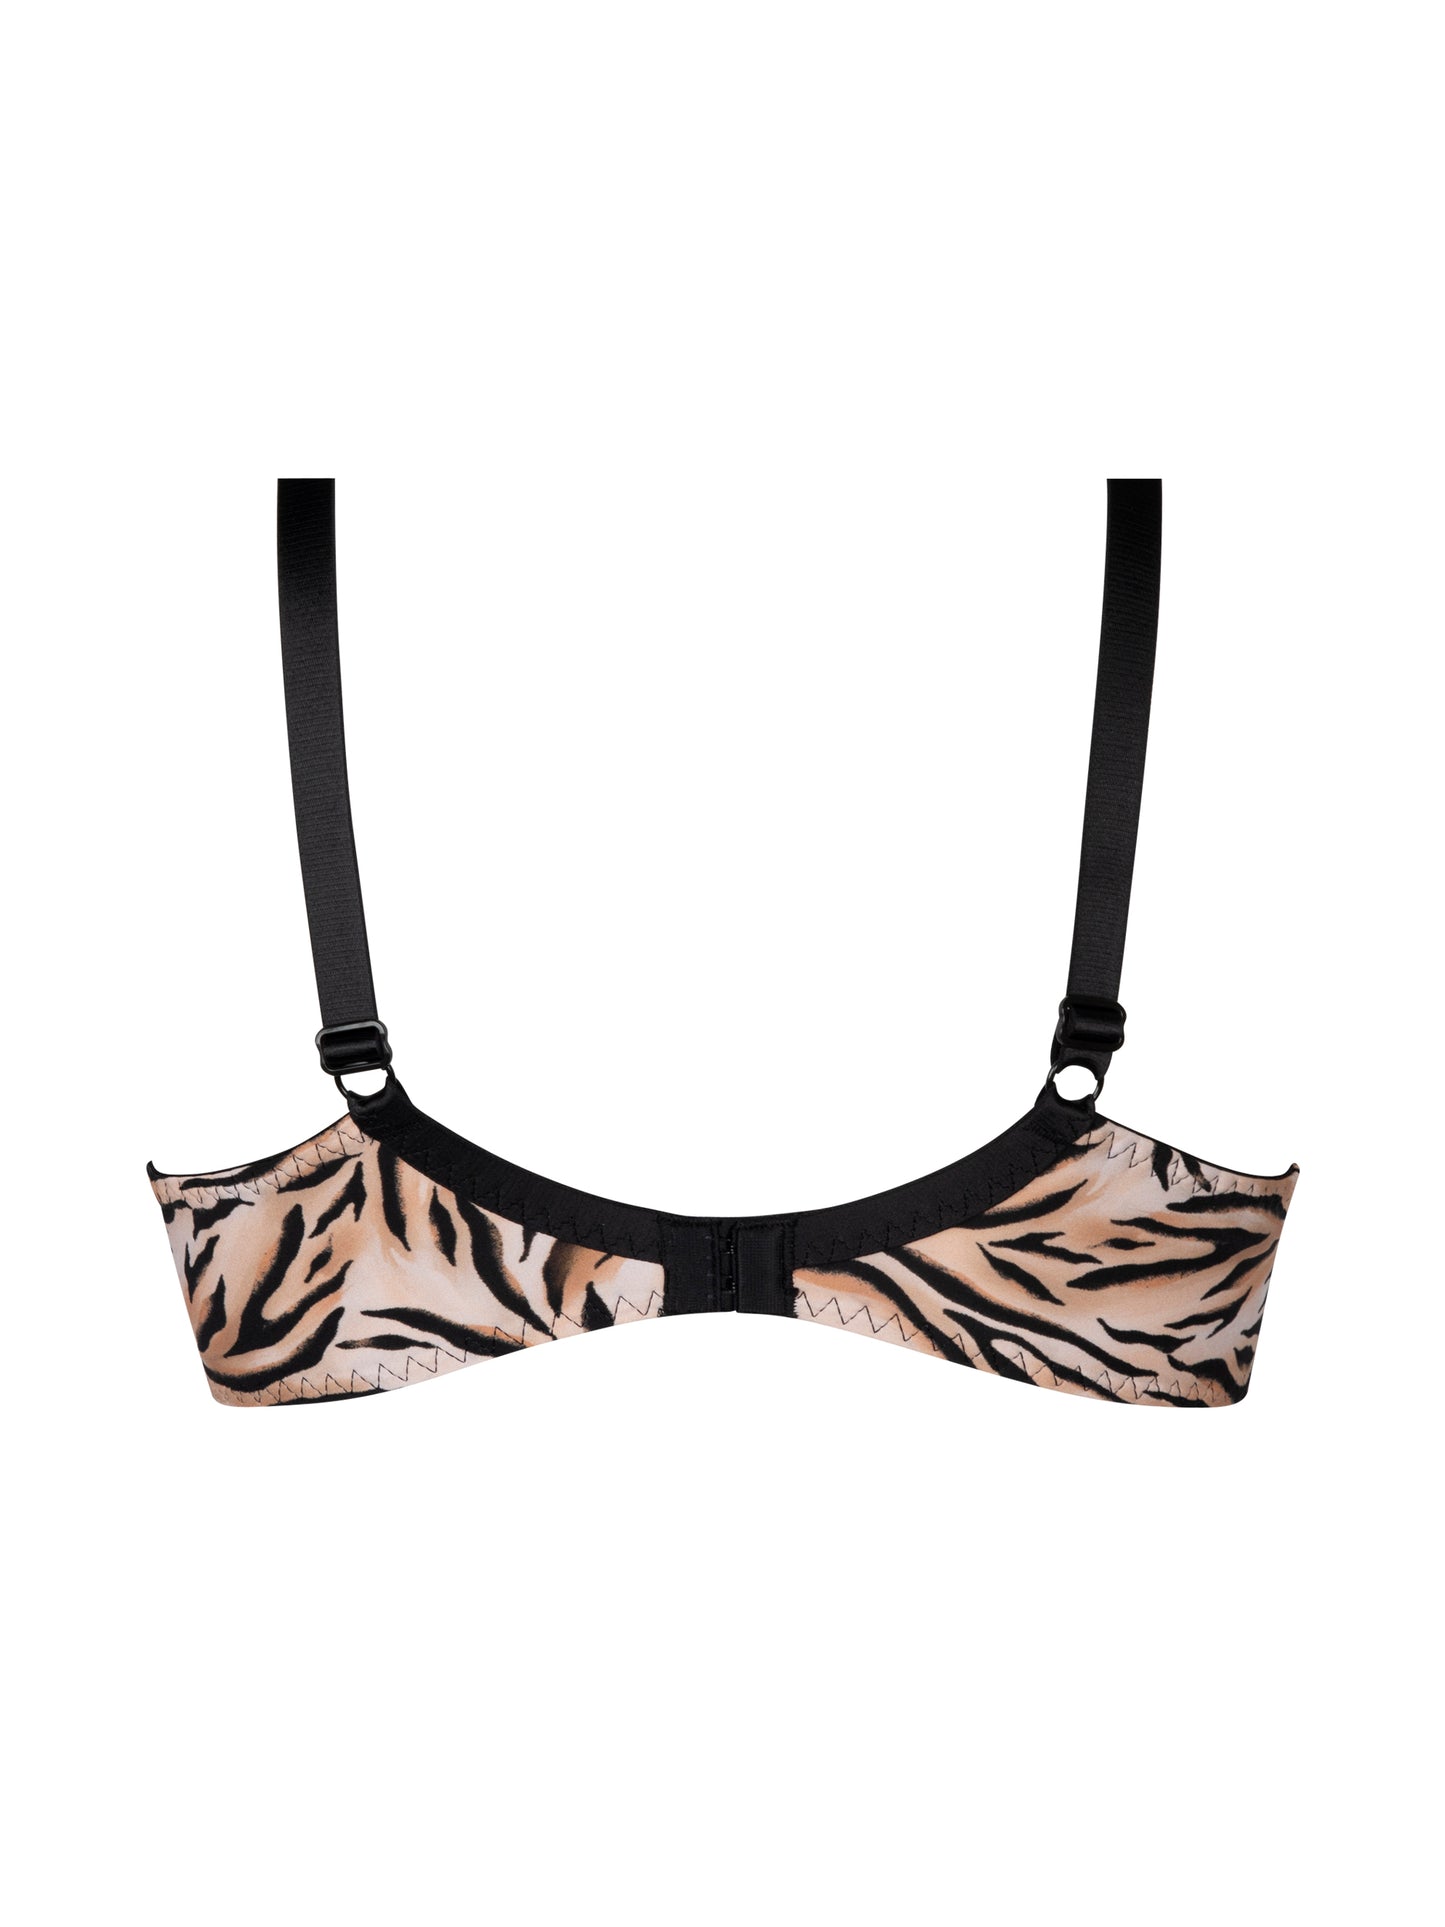 Tigre Rebelle 3/4 Cup Bra By Antigel - sizes 30-40 C-G (EURO sizes)